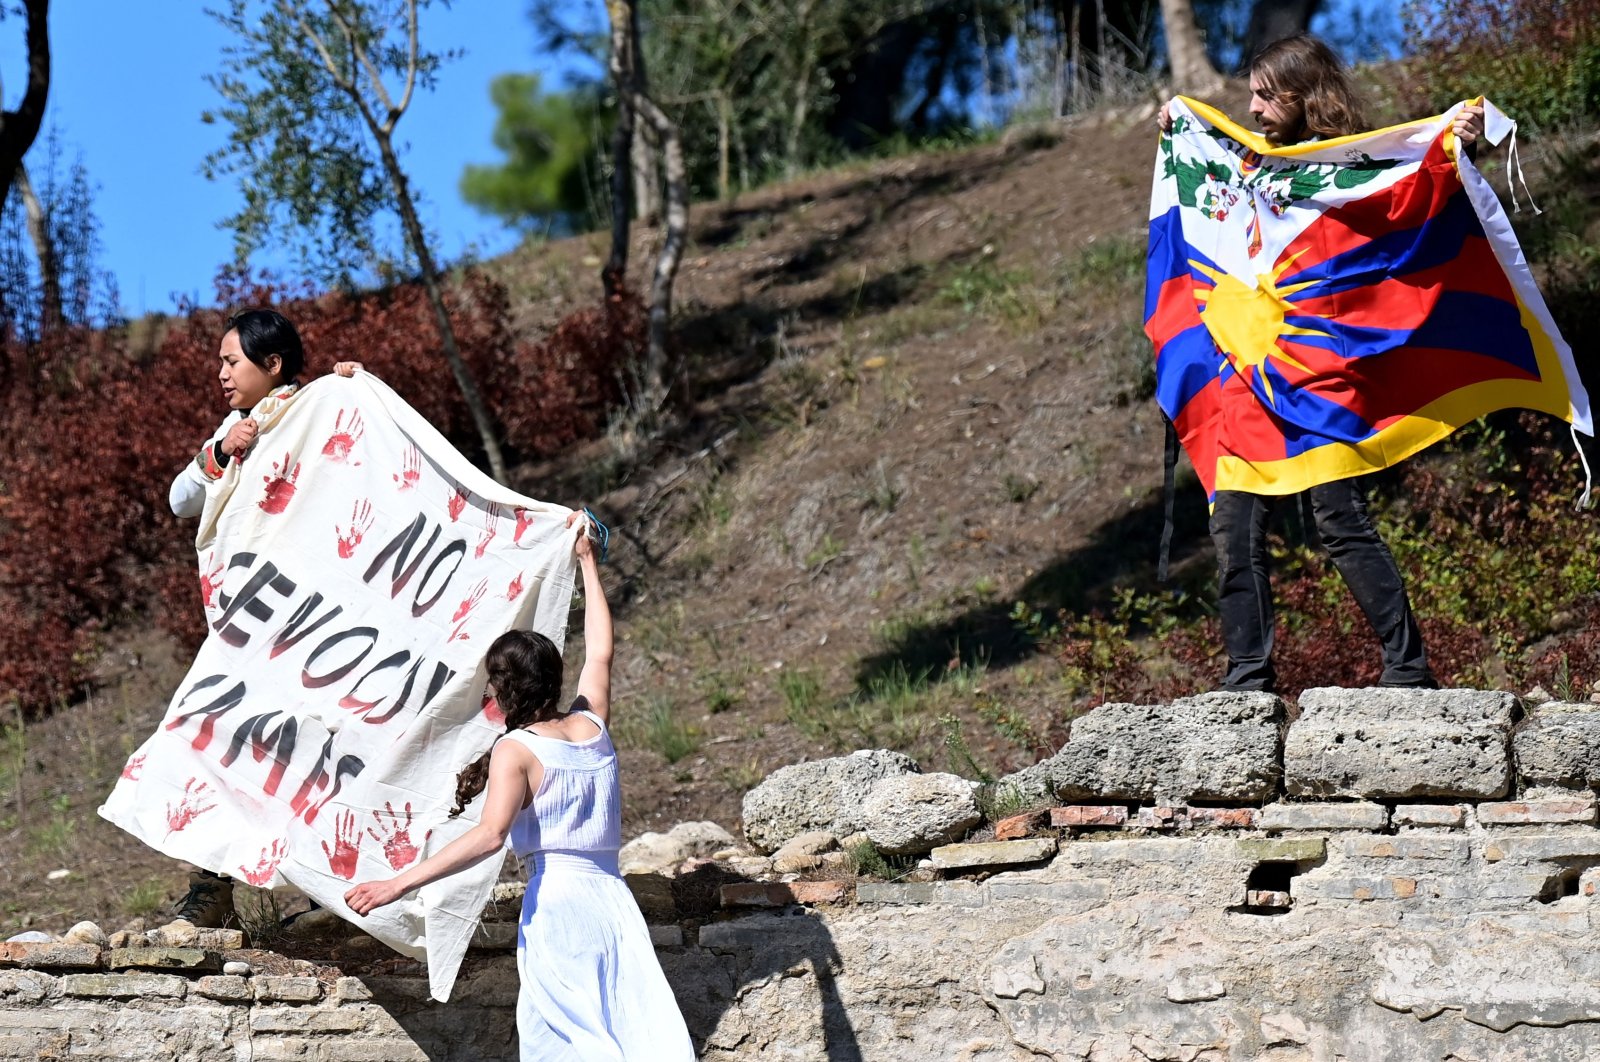 Three protesters unfurl a banner and a Tibetan flag during the flame-lighting ceremony for the Beijing 2022 Winter Olympics at the Ancient Olympia archeological site, birthplace of the ancient Olympics in southern Greece, Oct. 18, 2021. (AFP Photo)